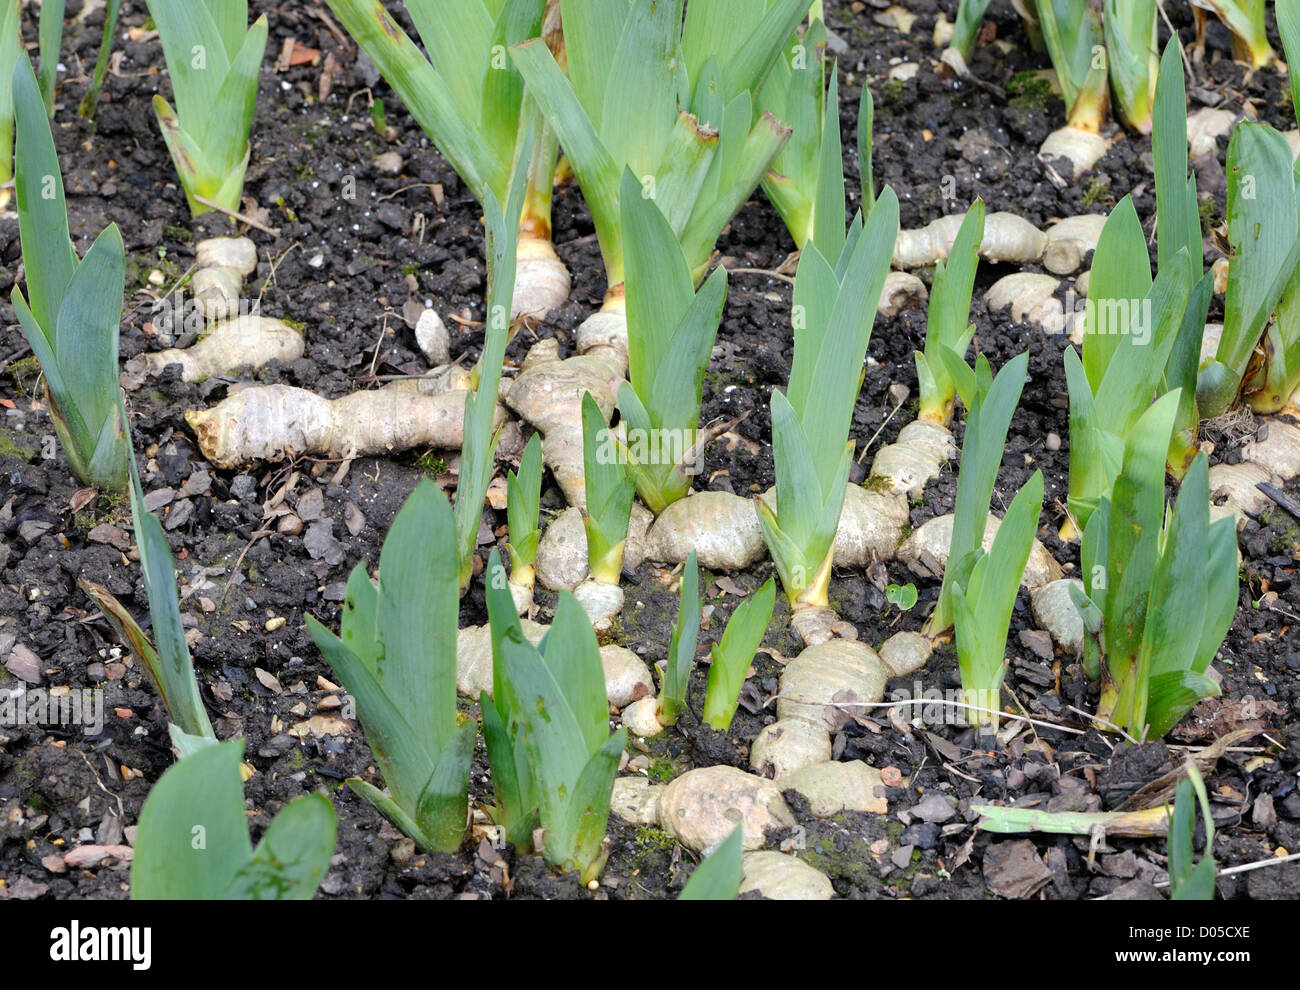 Bearded Iris shoots with rhizomes spreading on the surface of the ground. Stock Photo